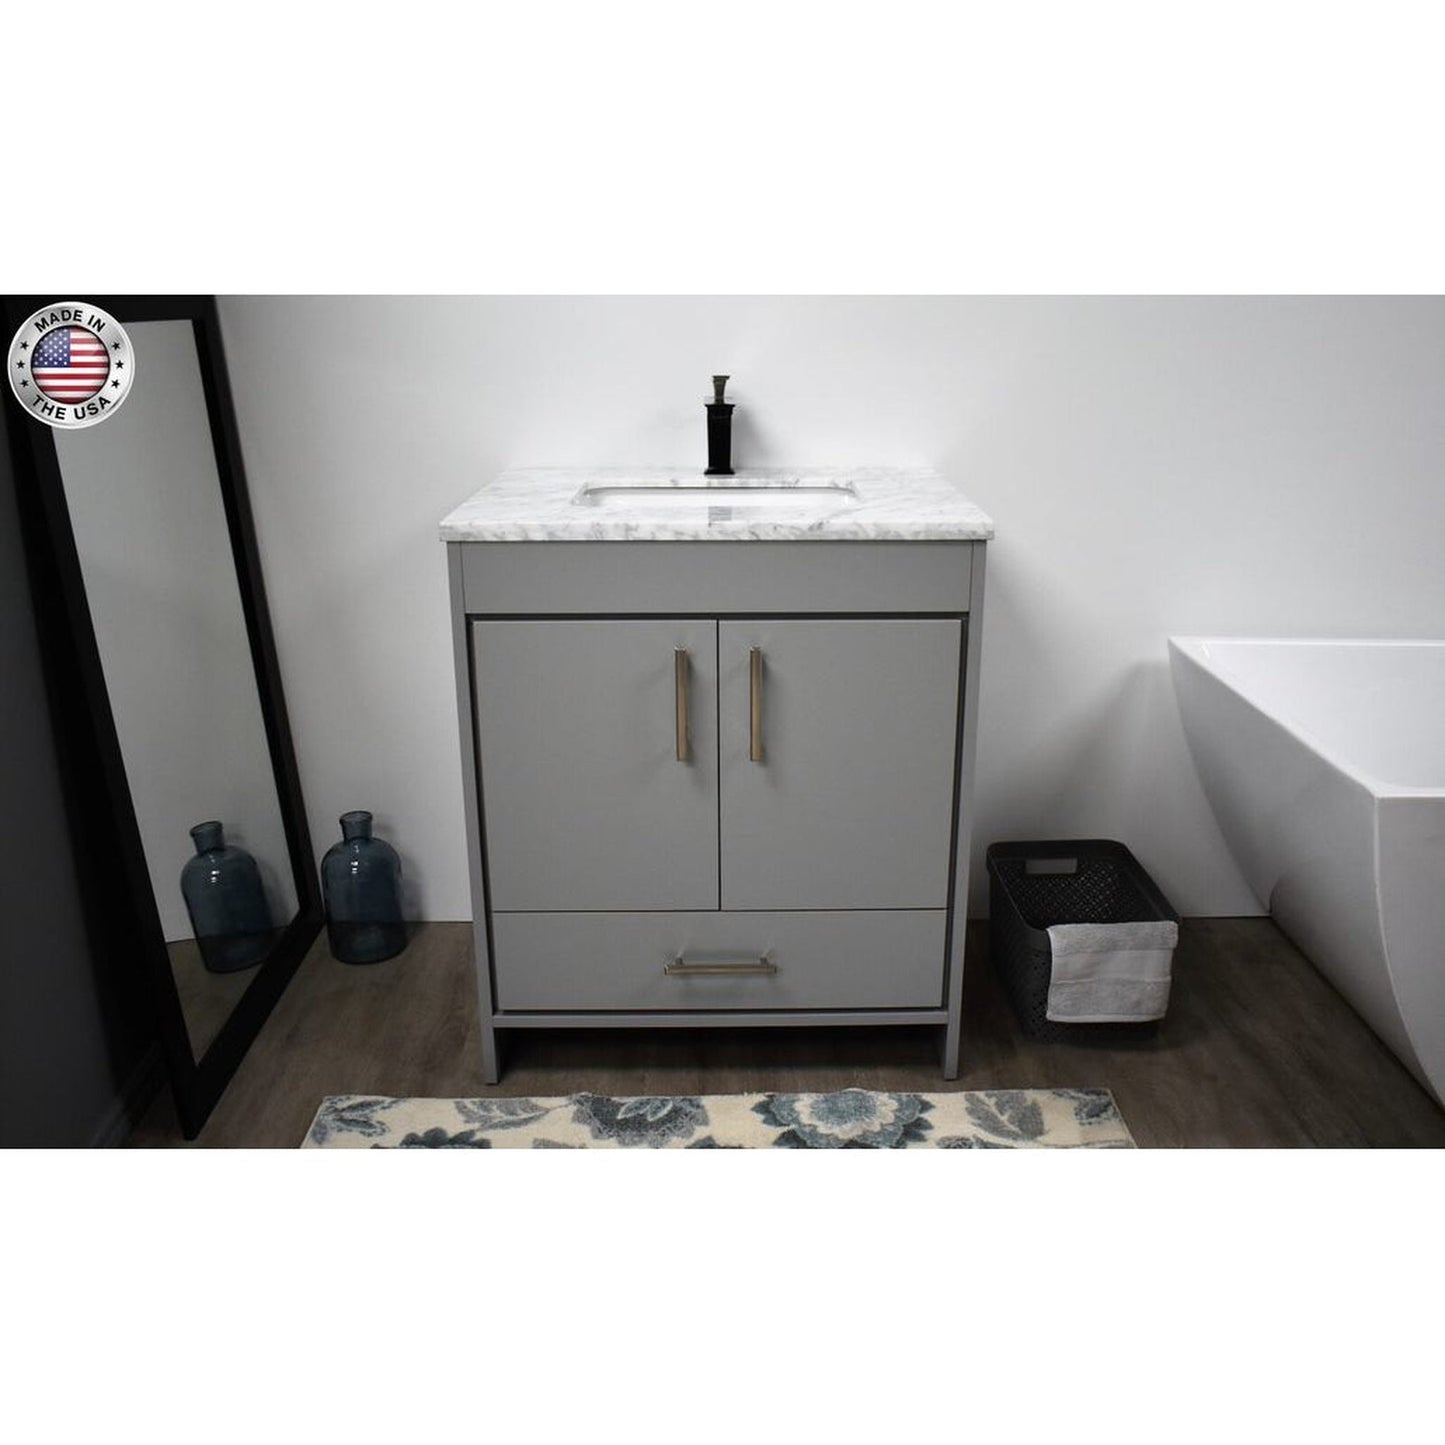 Volpa USA Capri 30" x 22" Gray Freestanding Modern Bathroom Vanity With Preinstalled Undermount Sink And Carrara Marble top With Brushed Nickel Edge Handles